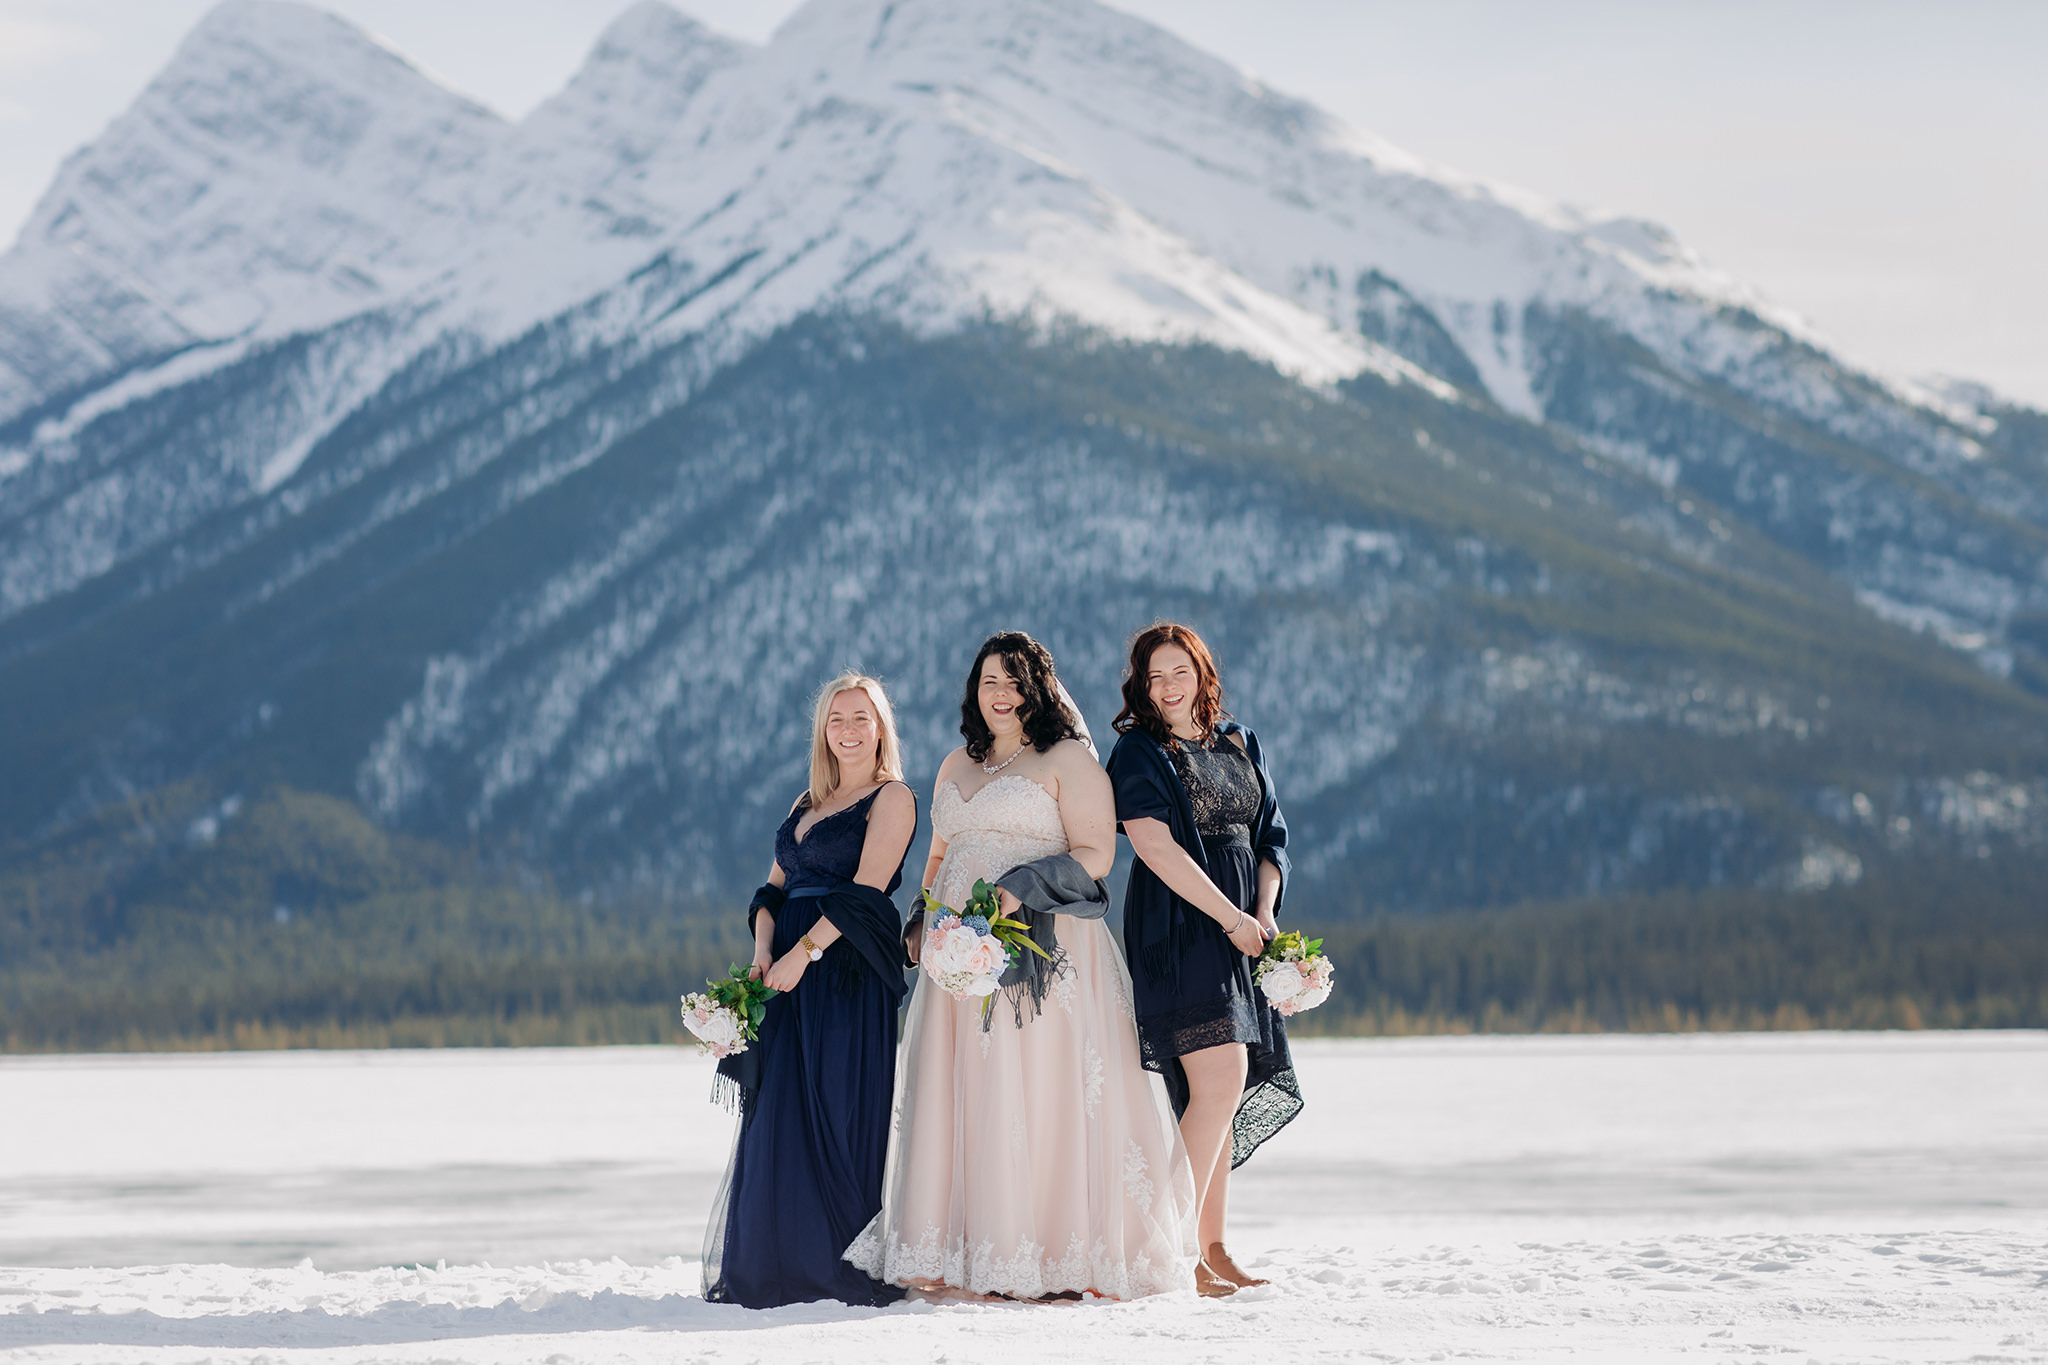 Falcon Crest Lodge wedding Canmore winter wedding photos wedding party at Goat Pond in Kananaskis photographed by ENV Photography